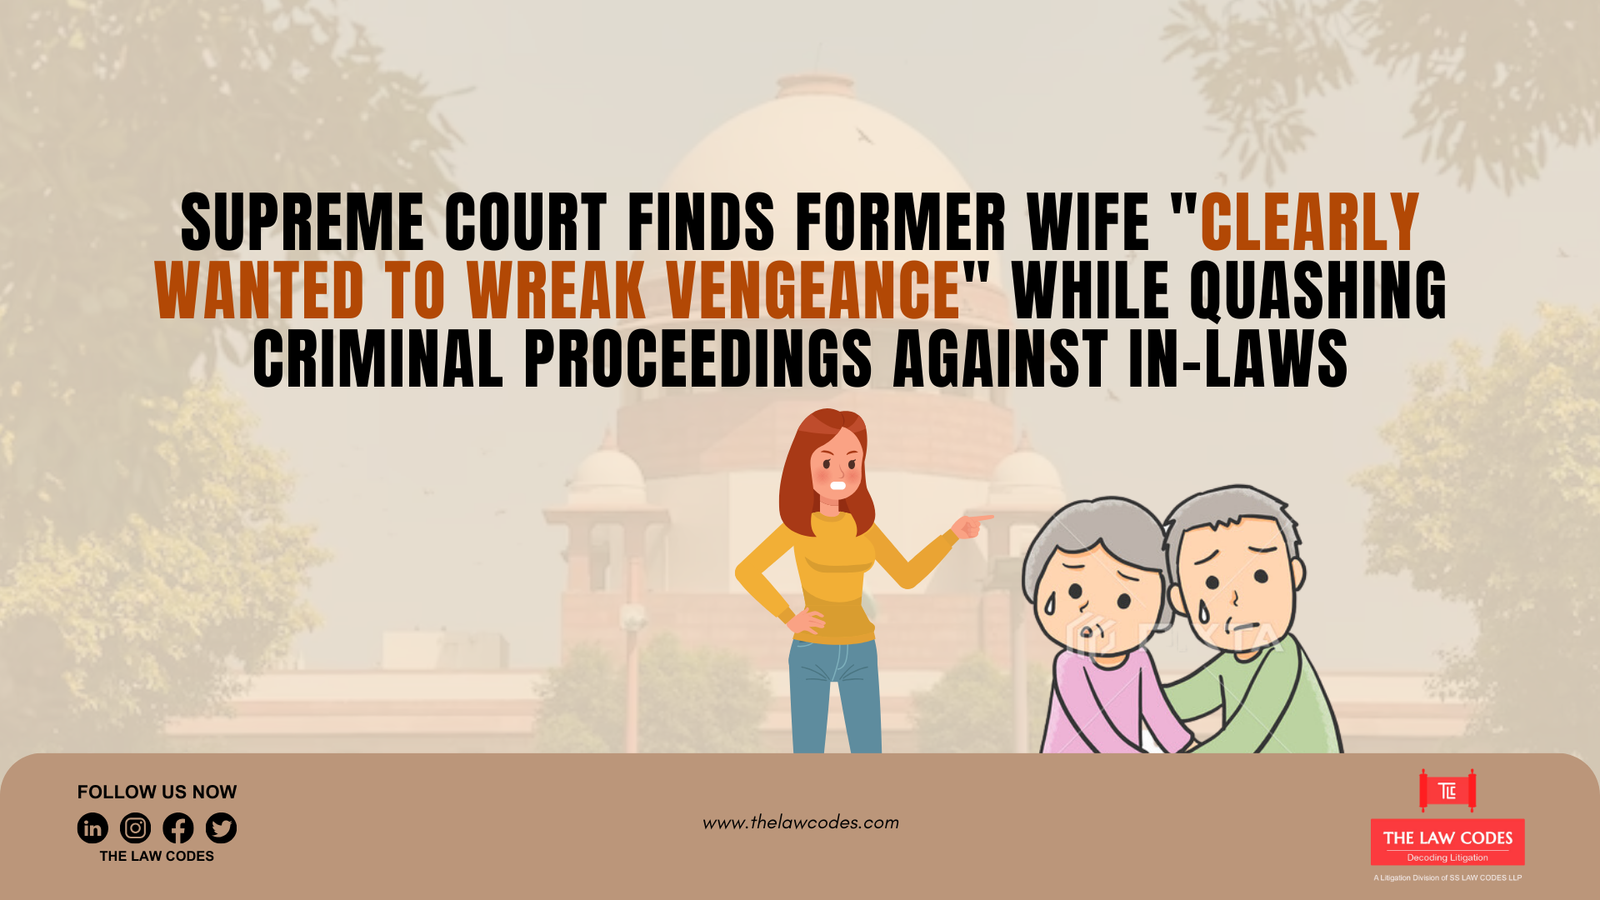 Supreme Court finds former wife clearly wanted to wreak vengeance While Quashing criminal proceedings agAinst in-laws